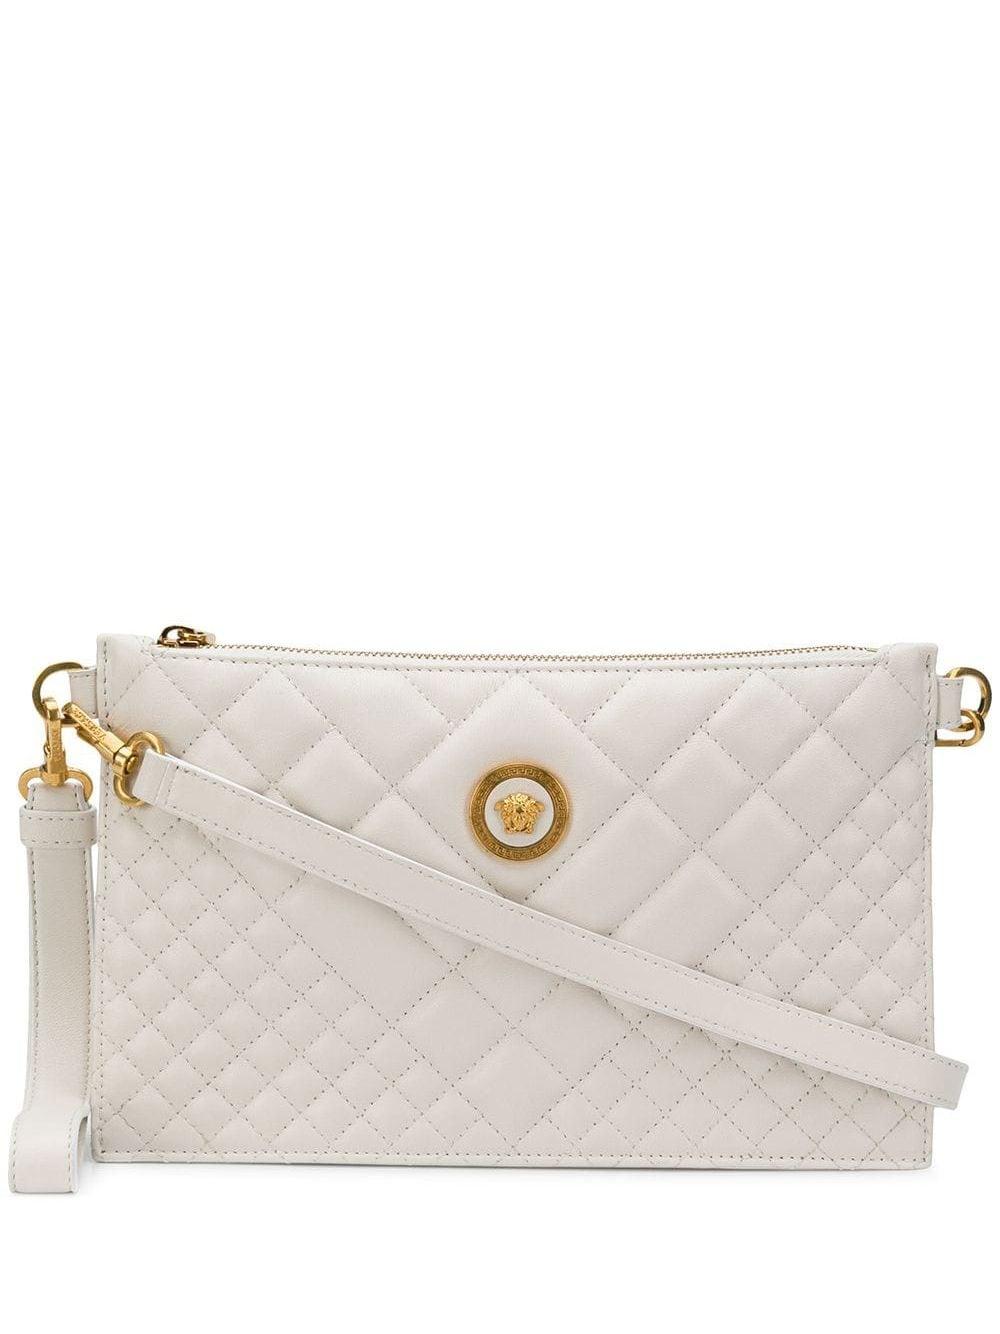 Versace Quilted Medusa Clutch Bag in White | Lyst